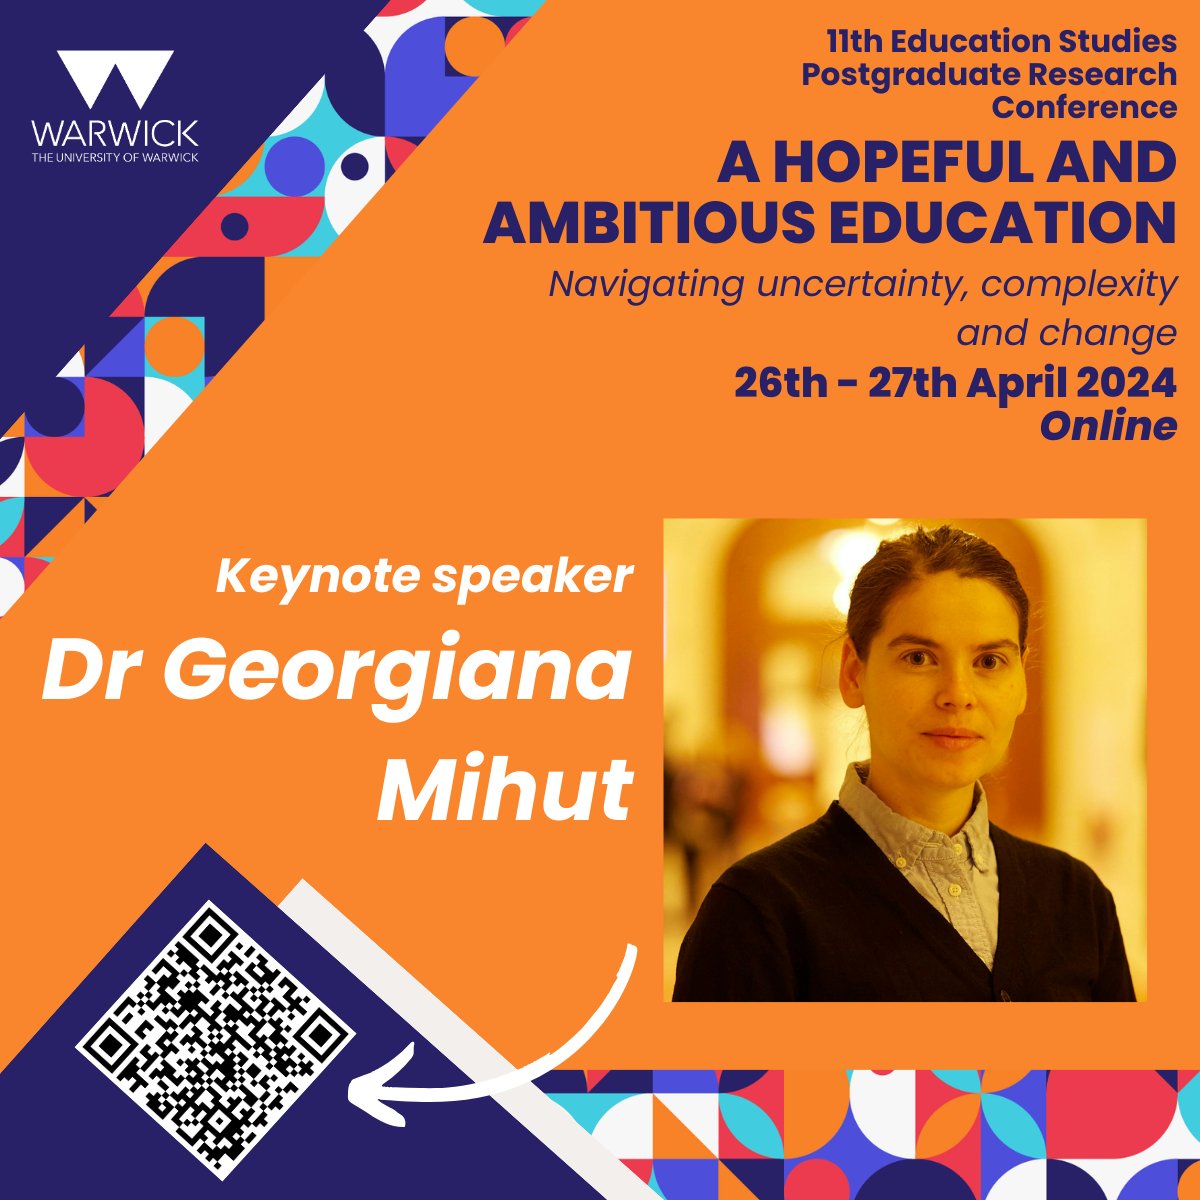 Keynote speaker spotlight #1! Join us on Friday to hear Dr Georgiana Mihut @GeorgianaMihut talk about ‘Class, rank, and mobilities: Research that inspires hope’ Find out more and register to attend for free: warwick.ac.uk/fac/soc/ces/ne…